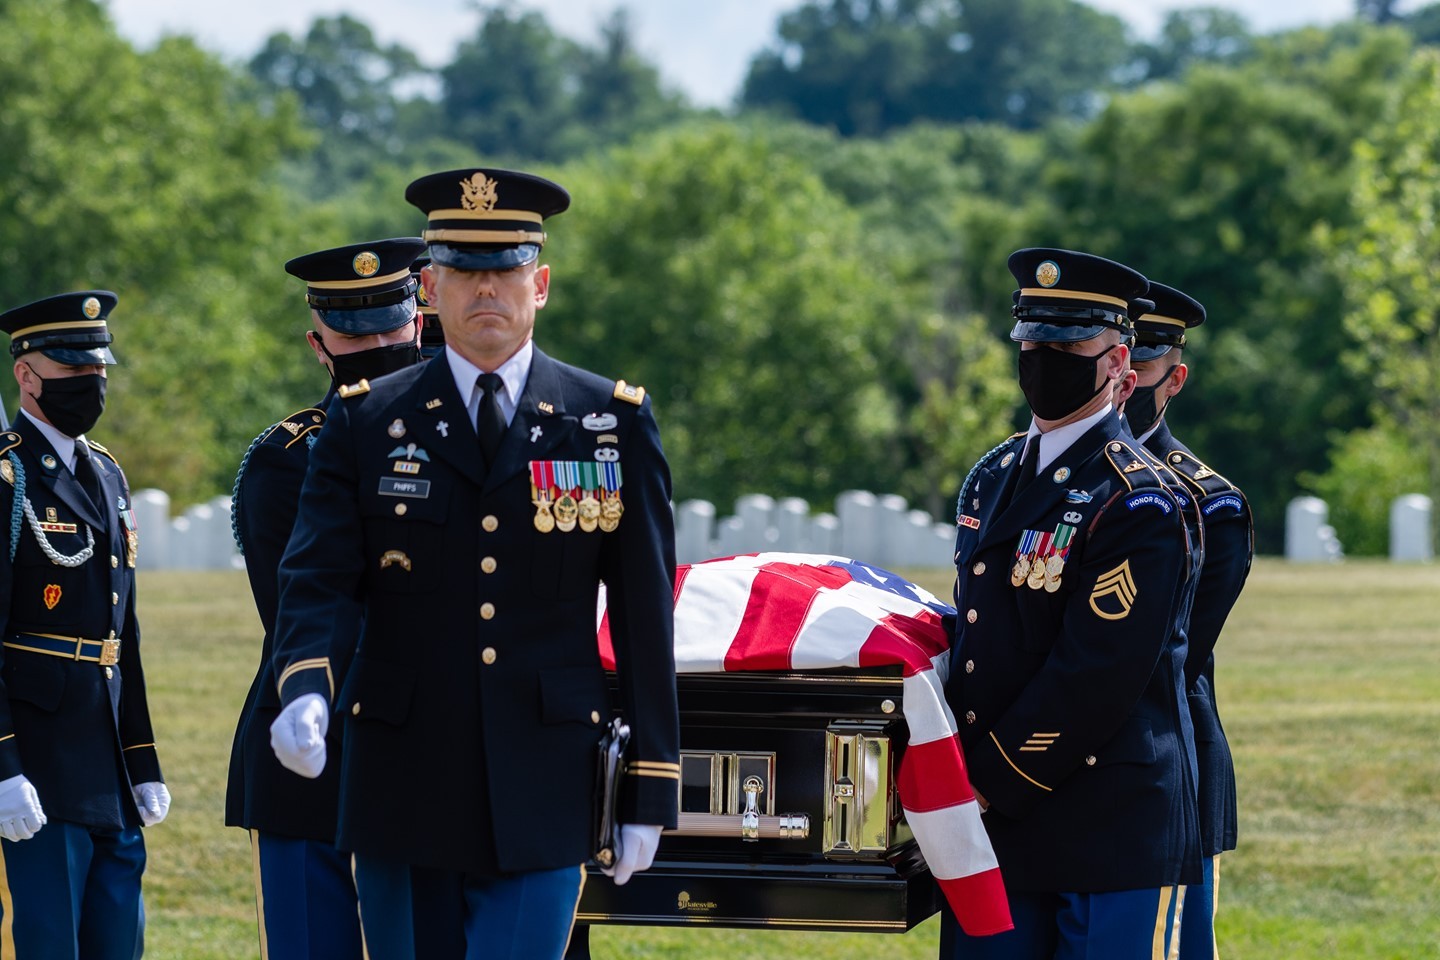 A US Army Chaplain escorts the remains of an American hero to their final resting place in Section 57 of Arlington National Cemetery.